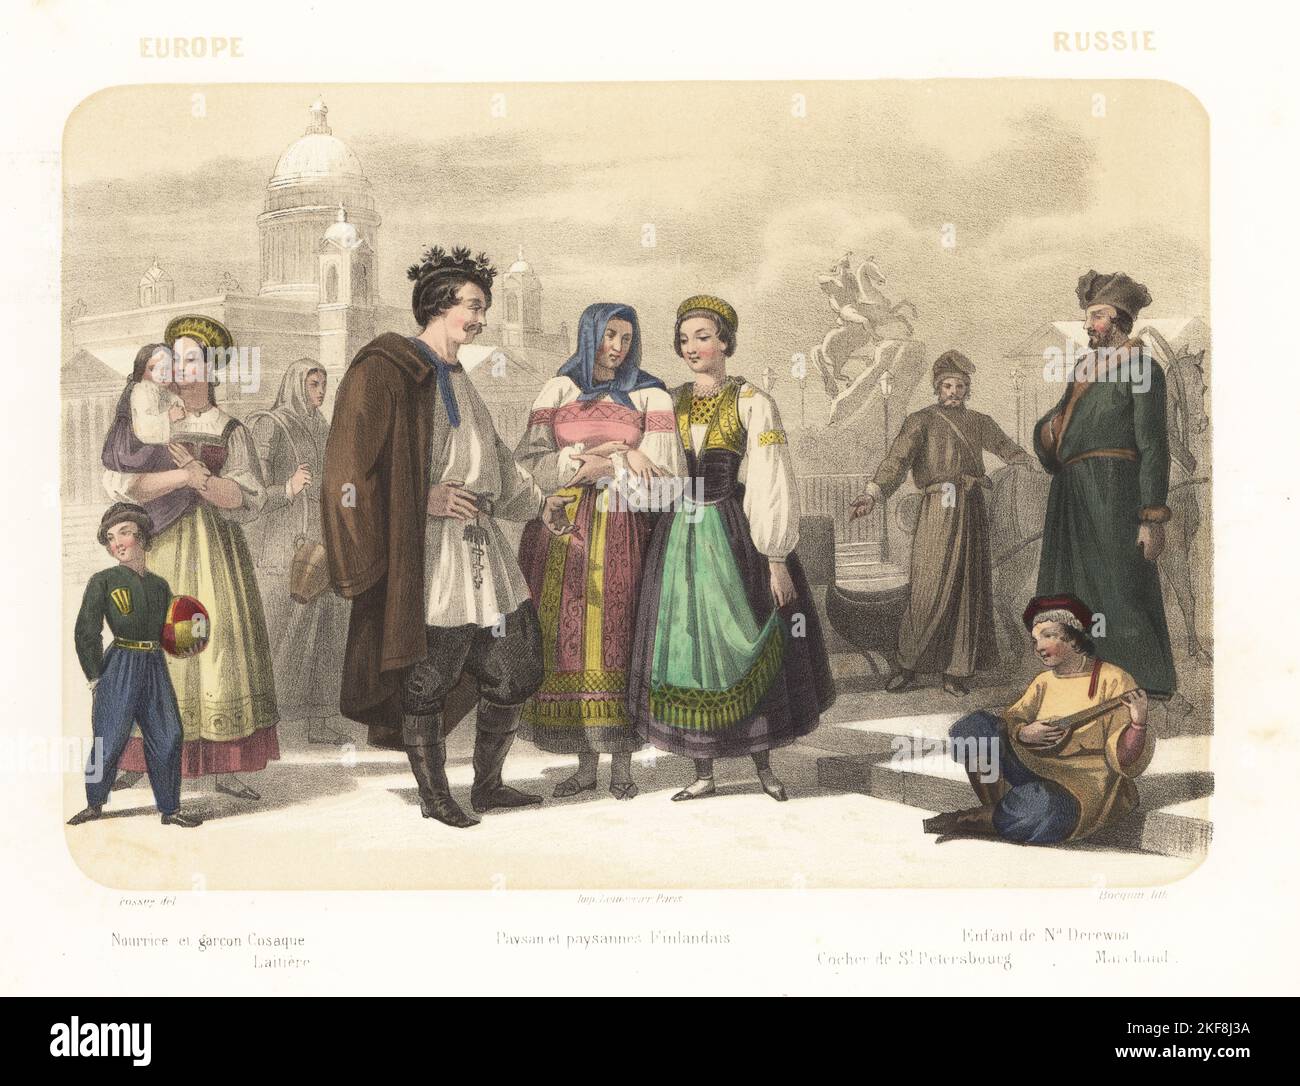 Costumes of the people of Russia, 1858. Nanny with Cossack boy, milkmaid with milkpail, Finnish peasants, sleigh driver, merchant, boy from Derewna, Belarus, playing a domra lute. In Senatskaia Square in St. Petersburg with the Bronze Horseman statue of Peter the Great and St. Isaac's Cathedral dome. Nourrice et garcon Cosaque, laitiere, paysan et paysannes Finlandais, cocher de St. Petersburg, marchand, enfant de Na. Derewna. Handcoloured and sepia-tinted lithograph by Jean-Adolphe Bocquin after an illustration by Felix Fossey from Elisabeth Muller (pseudonym of Leonie Bedelet)’s Le Monde en Stock Photo